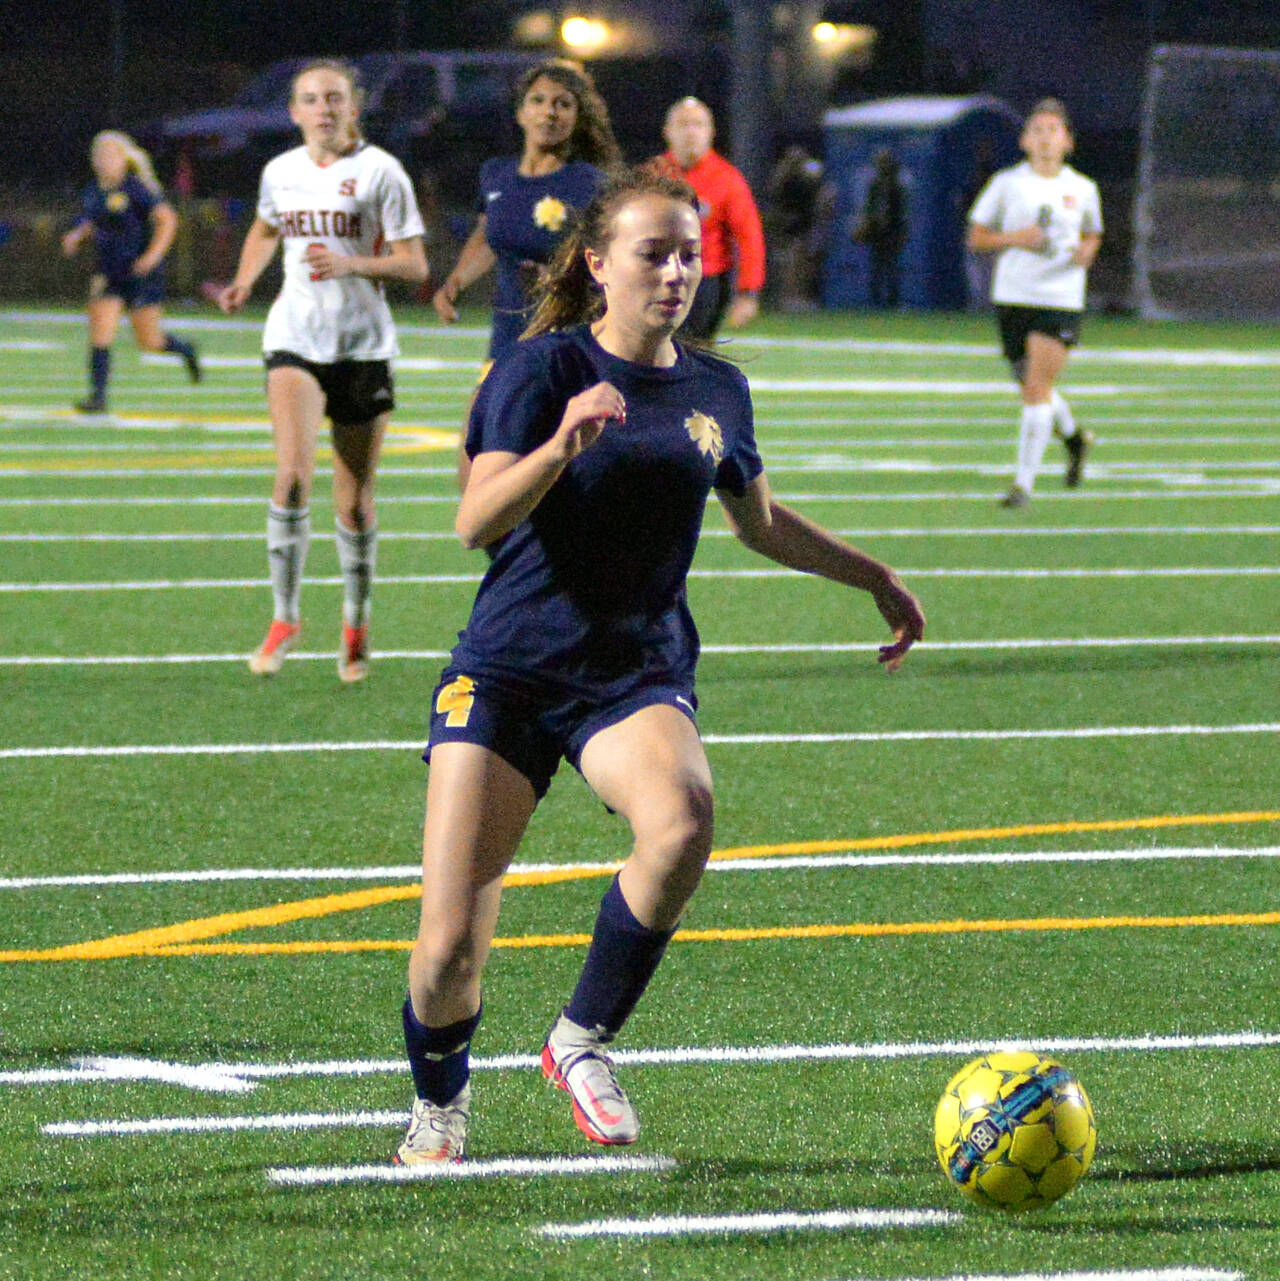 DAILY WORLD FILE PHOTO 
Aberdeen forward Annie Troeh had a goal and an assist in a 2-1 victory over WF West on Tuesday at Stewart Field in Aberdeen.